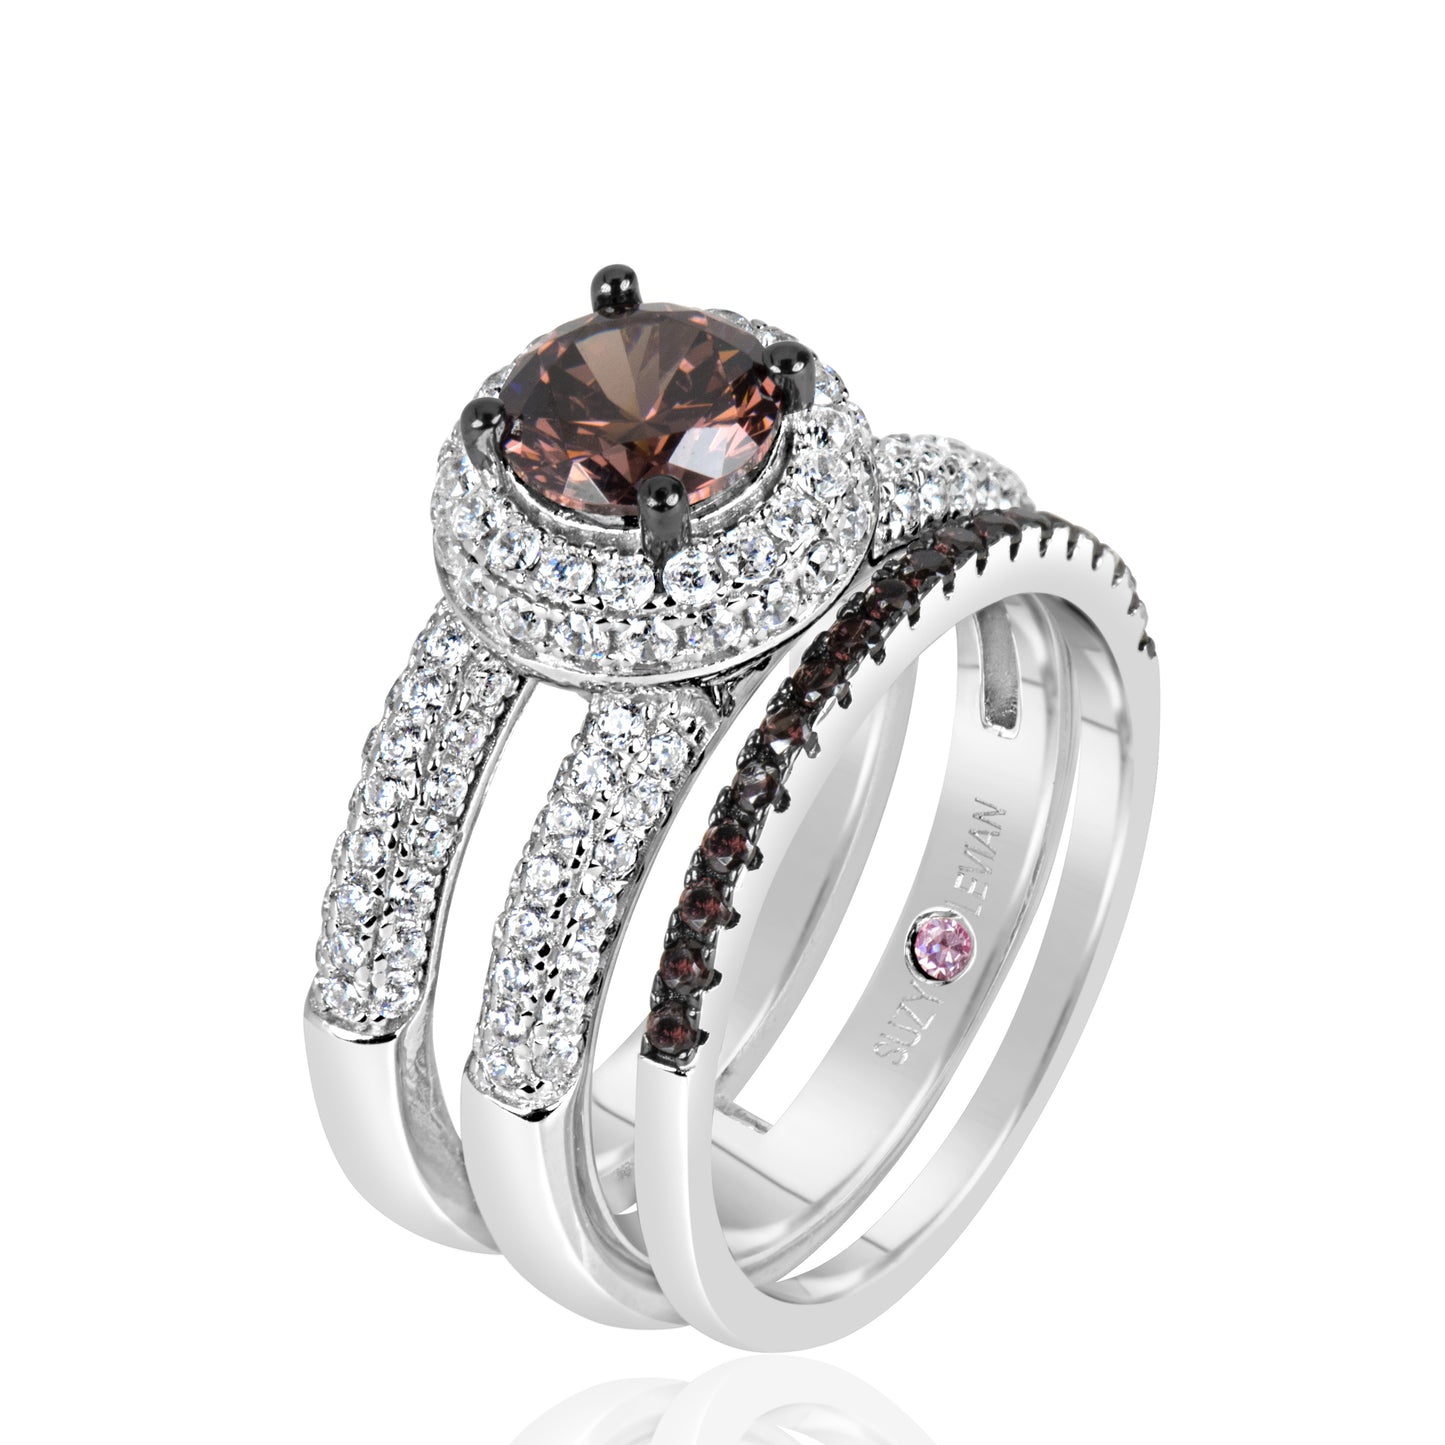 Suzy Levian Sterling Silver Brown Brown and White Cubic Zirconia 2-Piece Engagement Ring